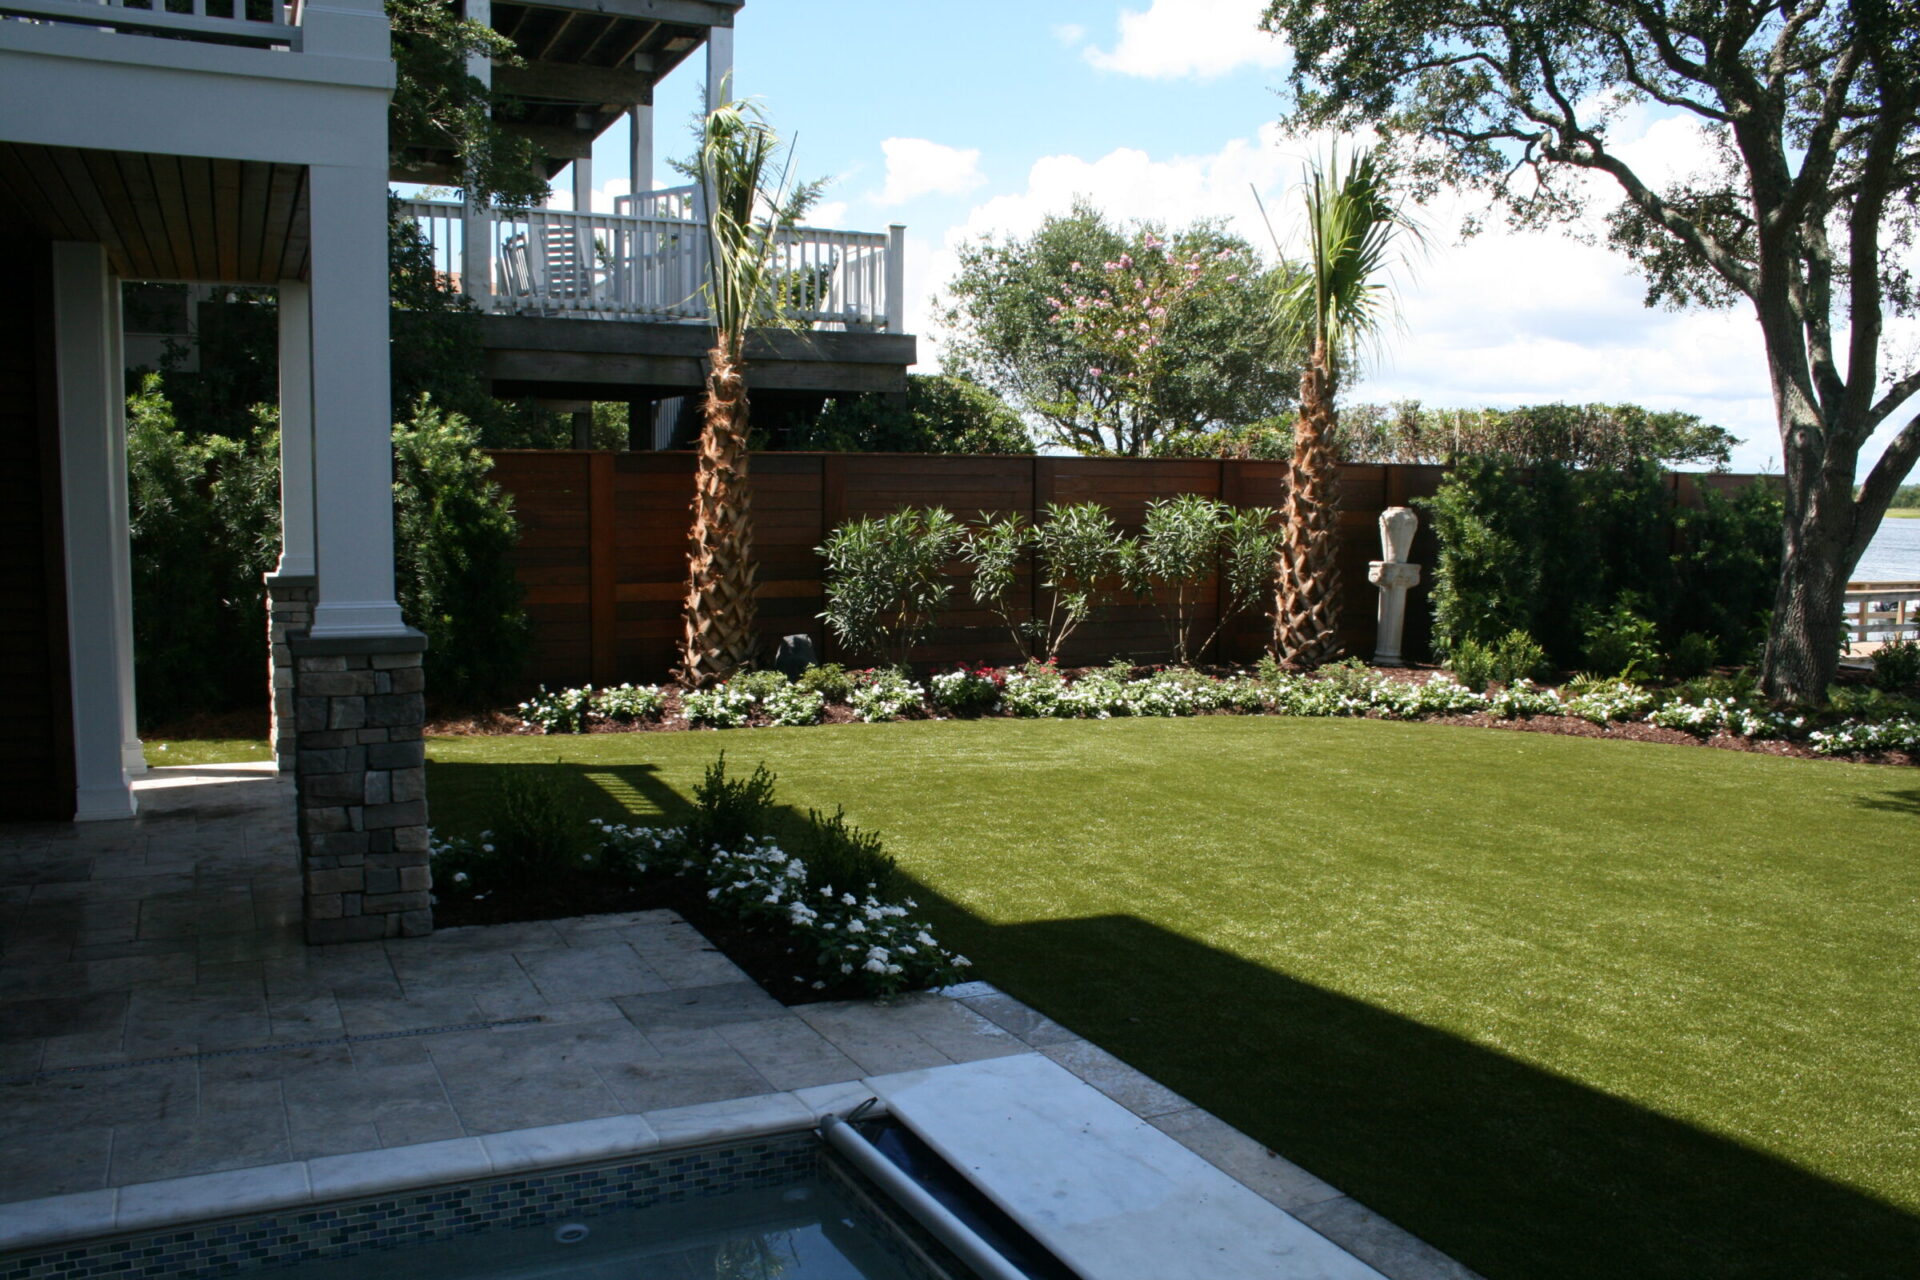 This image shows a beautifully landscaped backyard with a pool, neat lawn, tall palm trees, flowering plants, and a view of a water body.